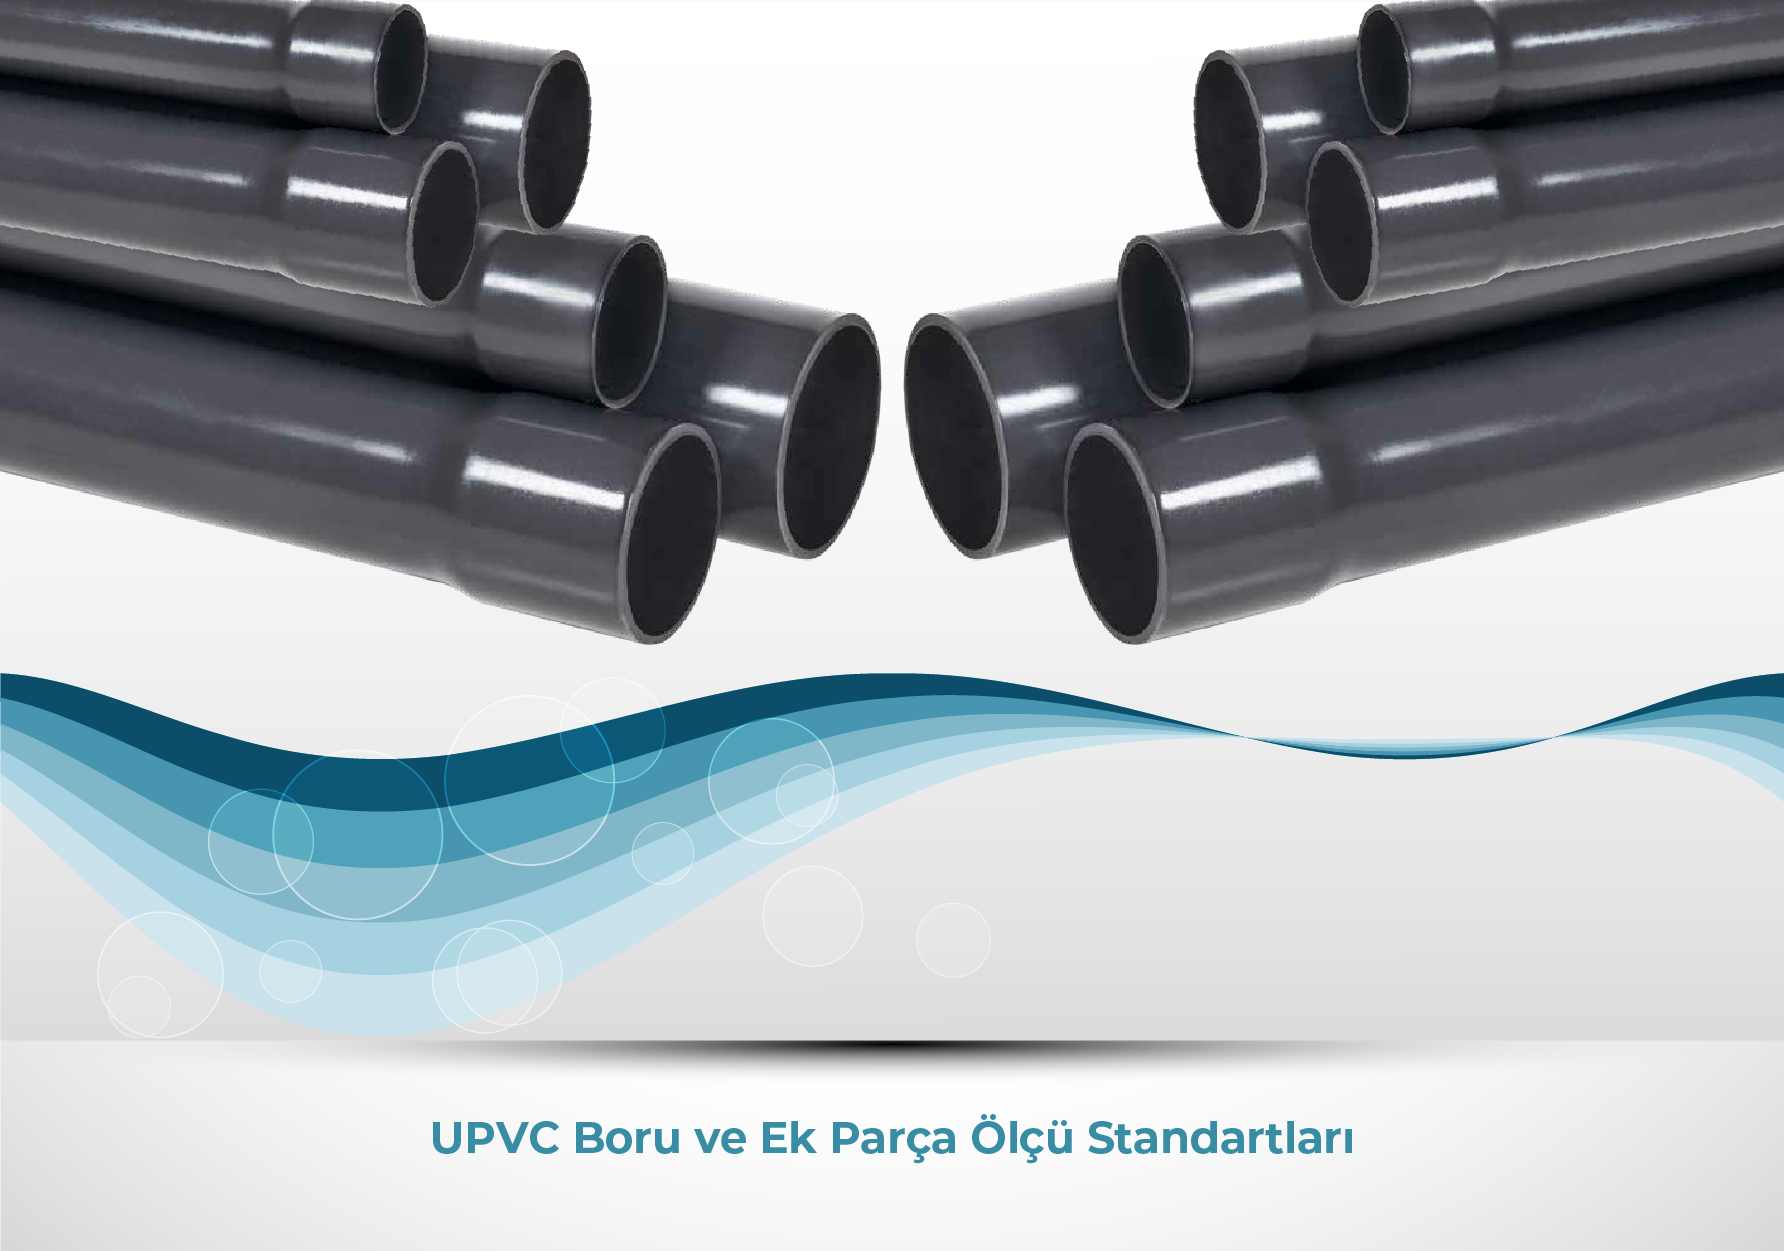 UPVC Pipe And Fitting Size Standards